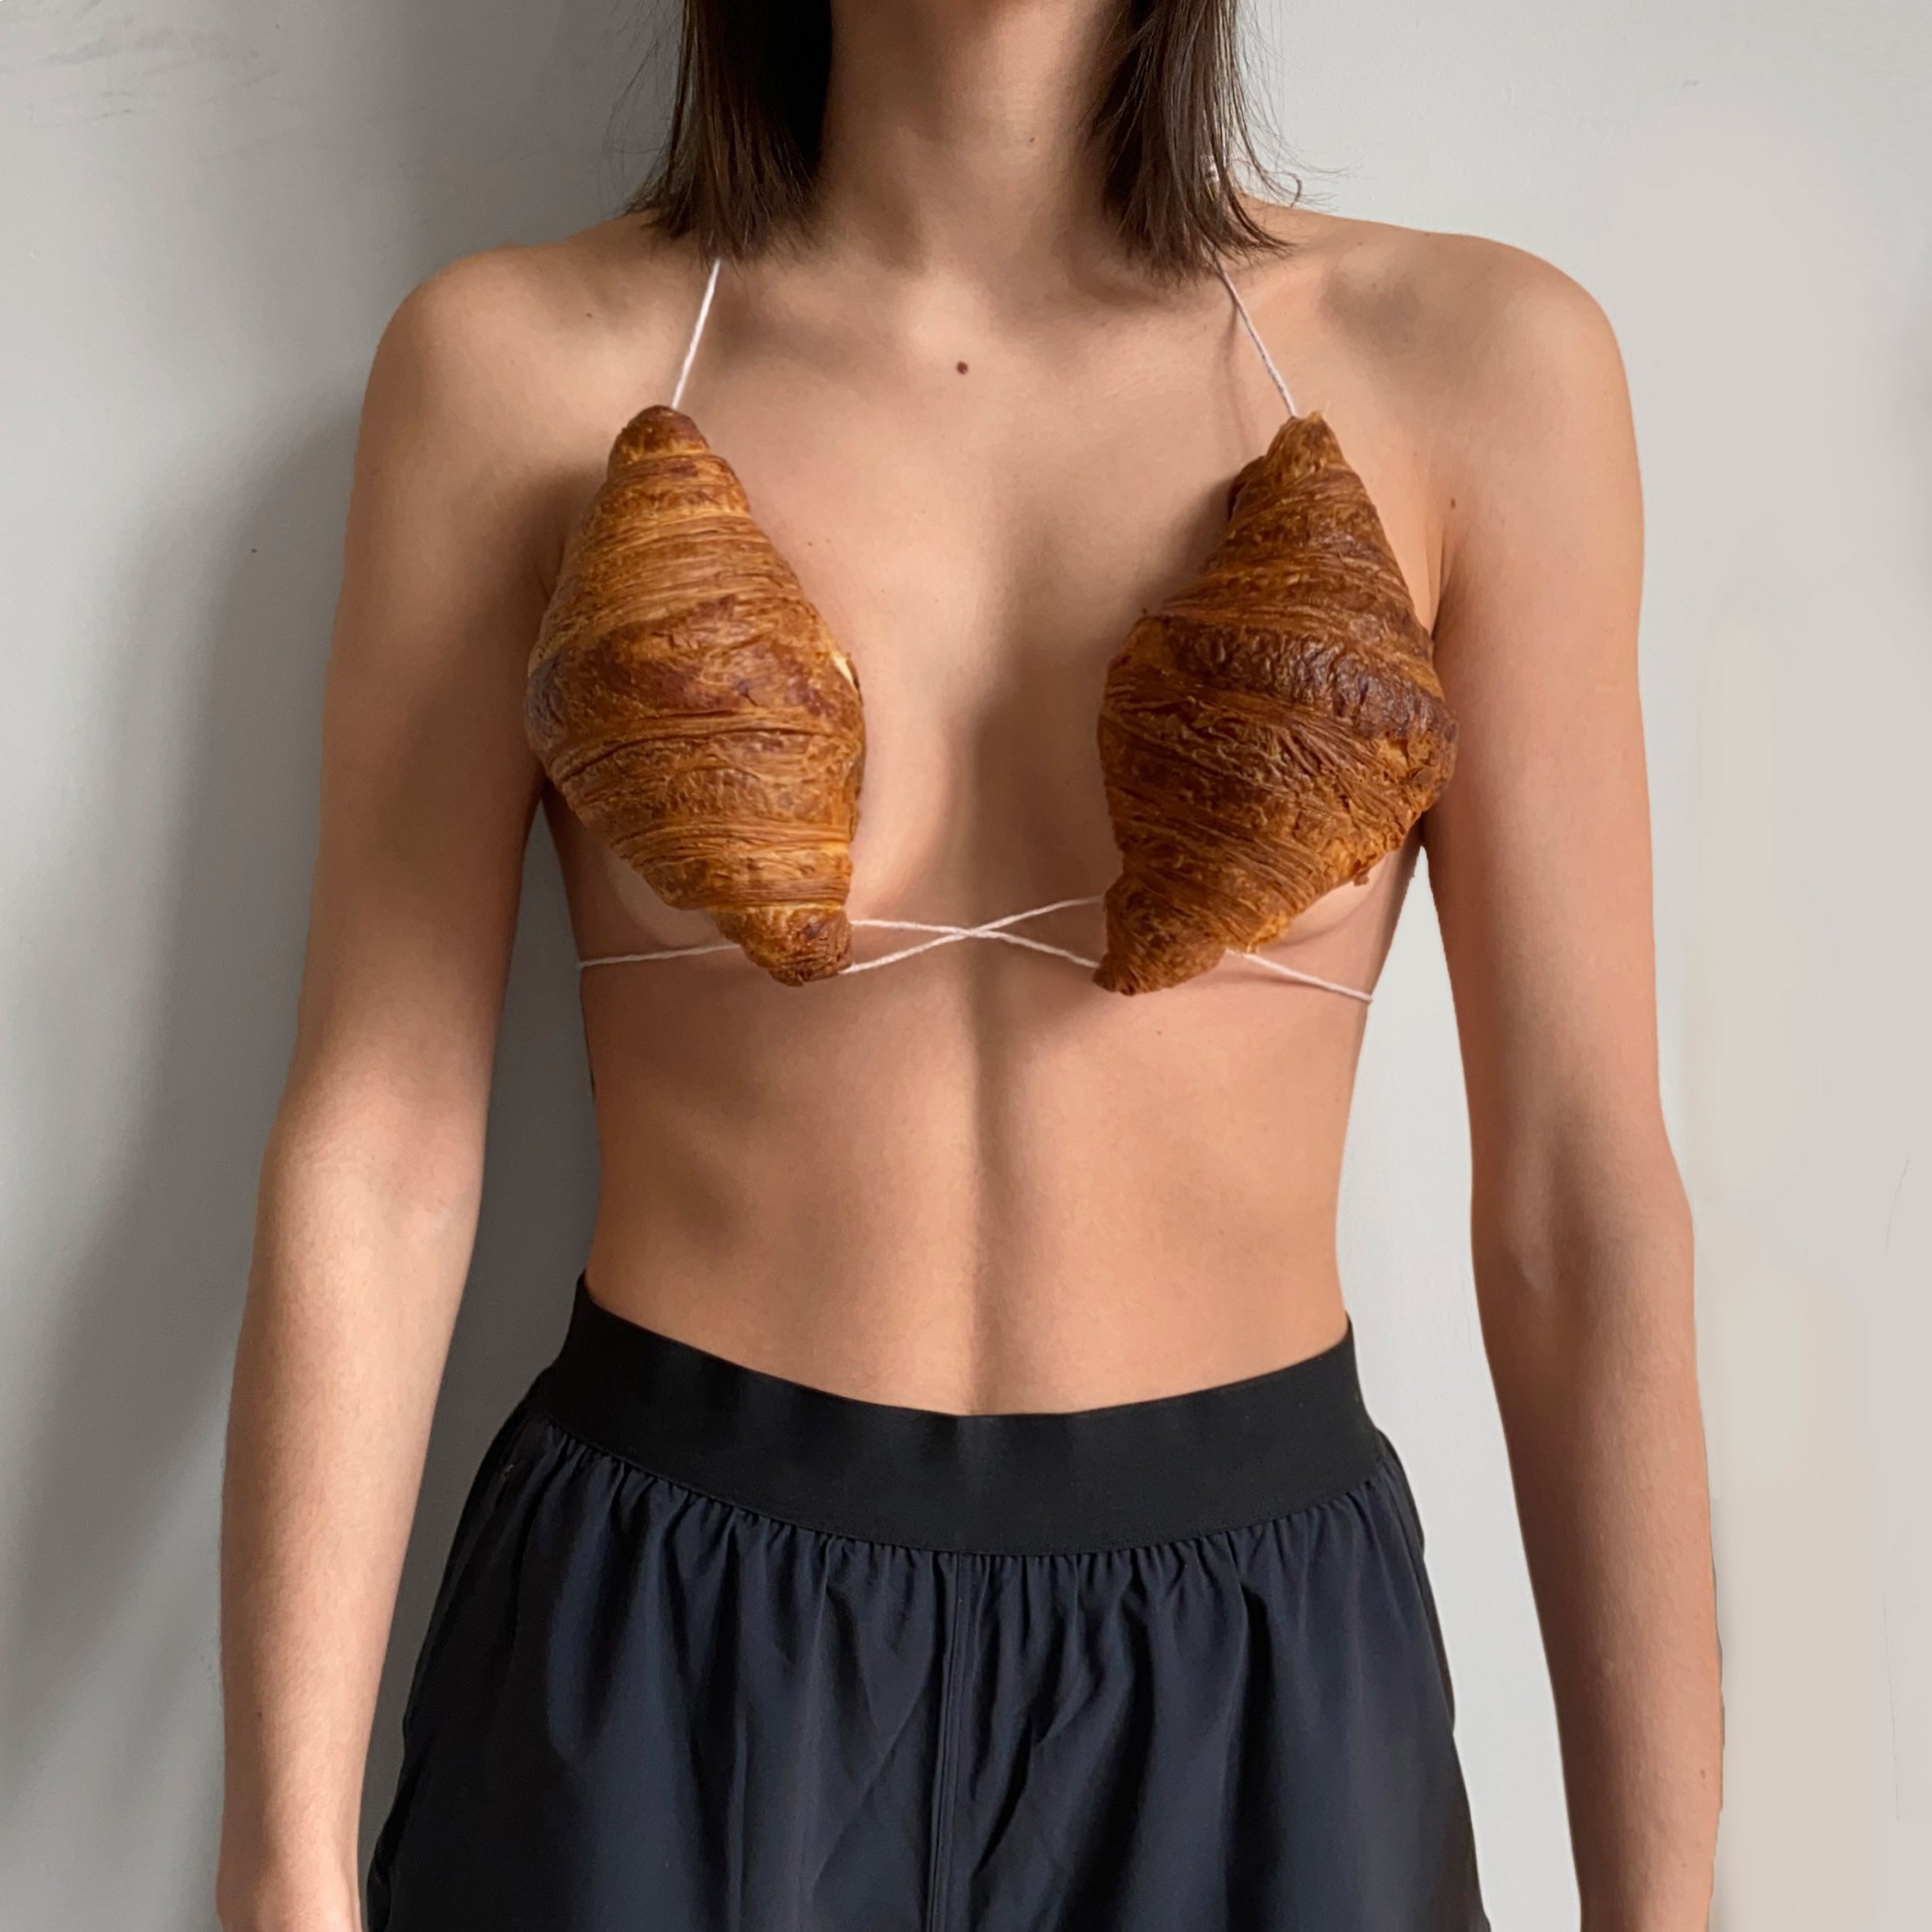 Brassant bra made from croissants by Nicole McLaughlin